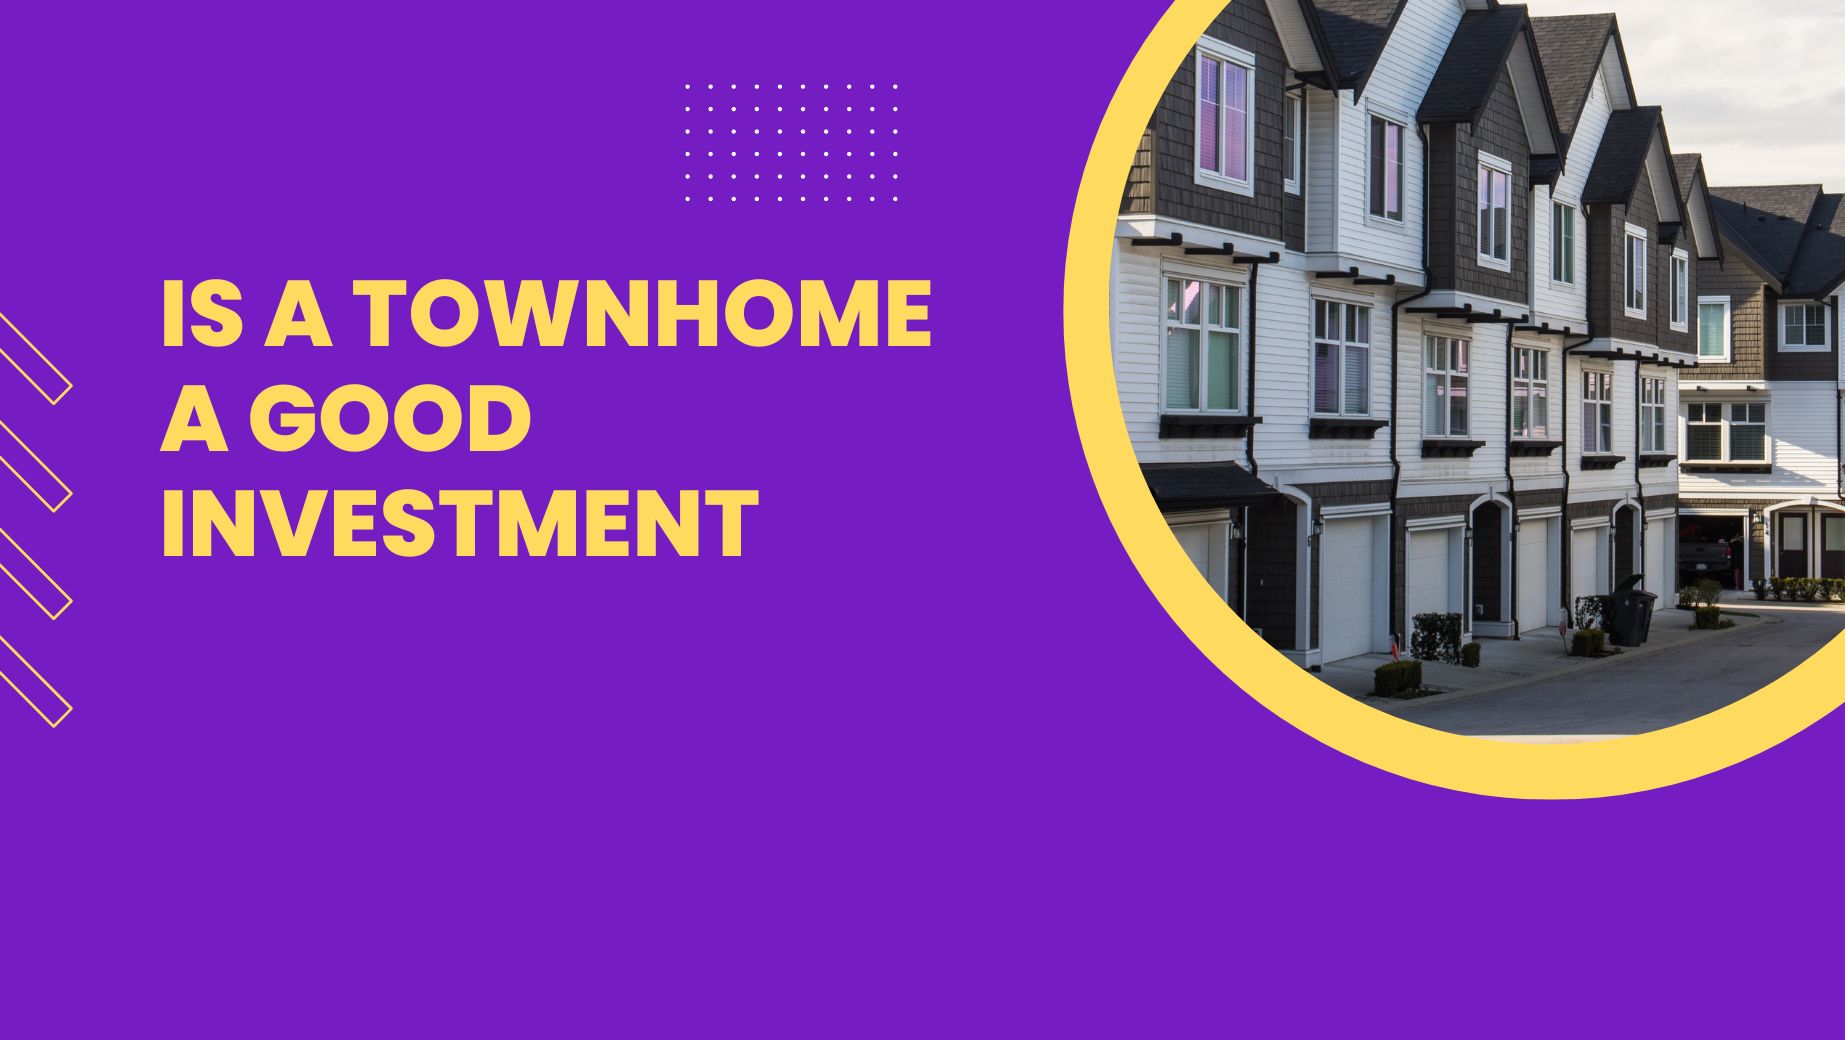 Is a Townhome a Good Investment